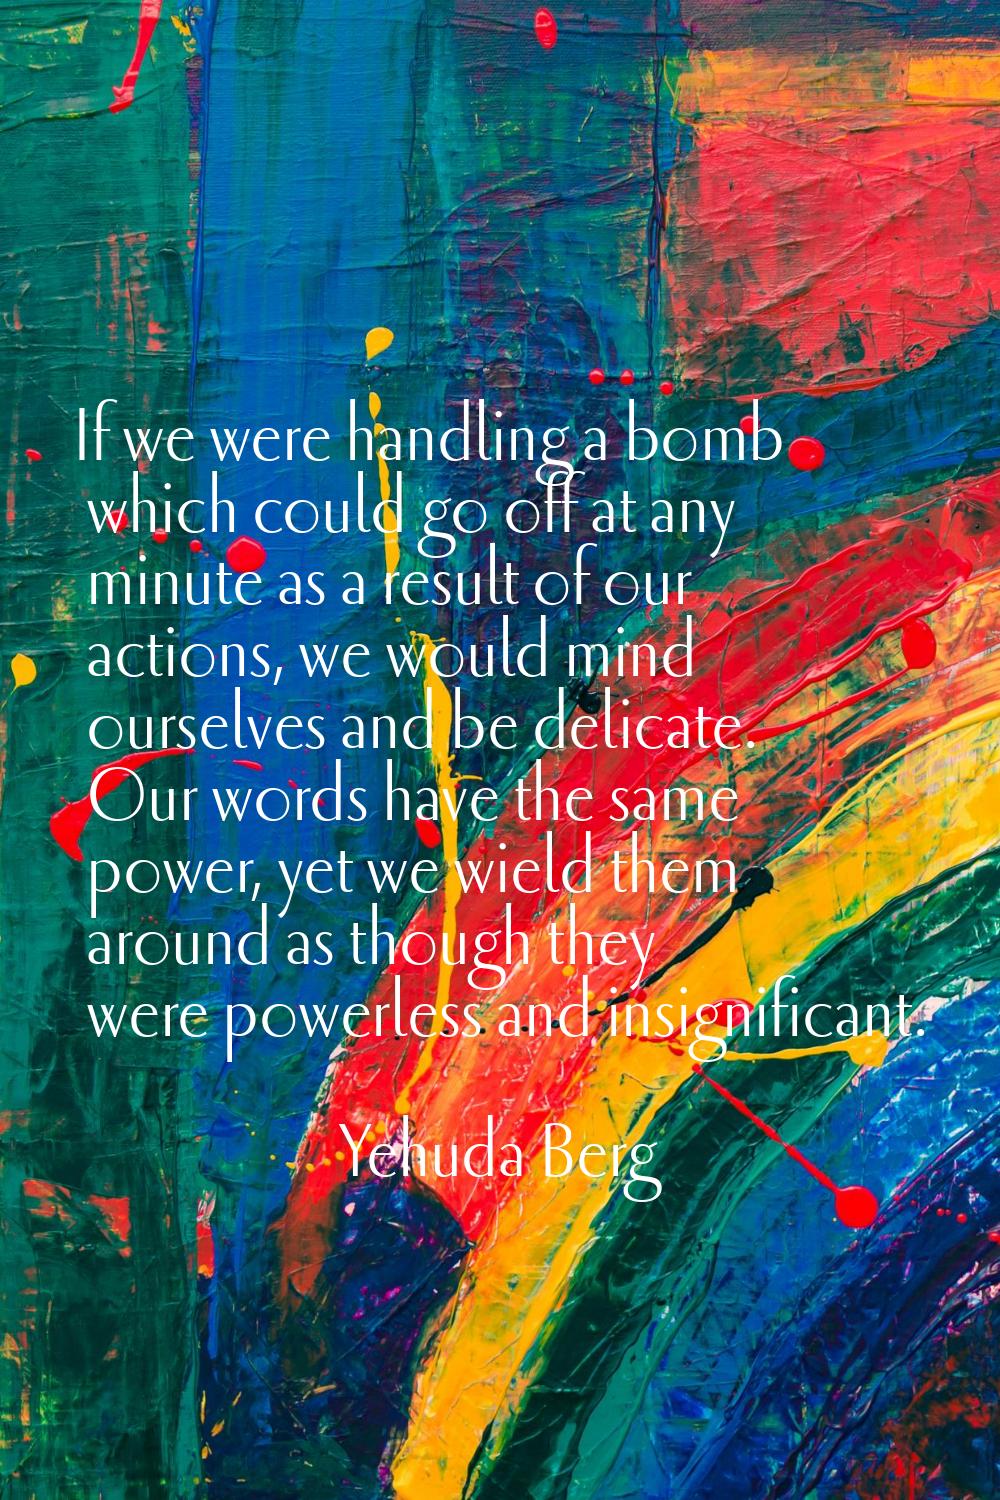 If we were handling a bomb which could go off at any minute as a result of our actions, we would mi